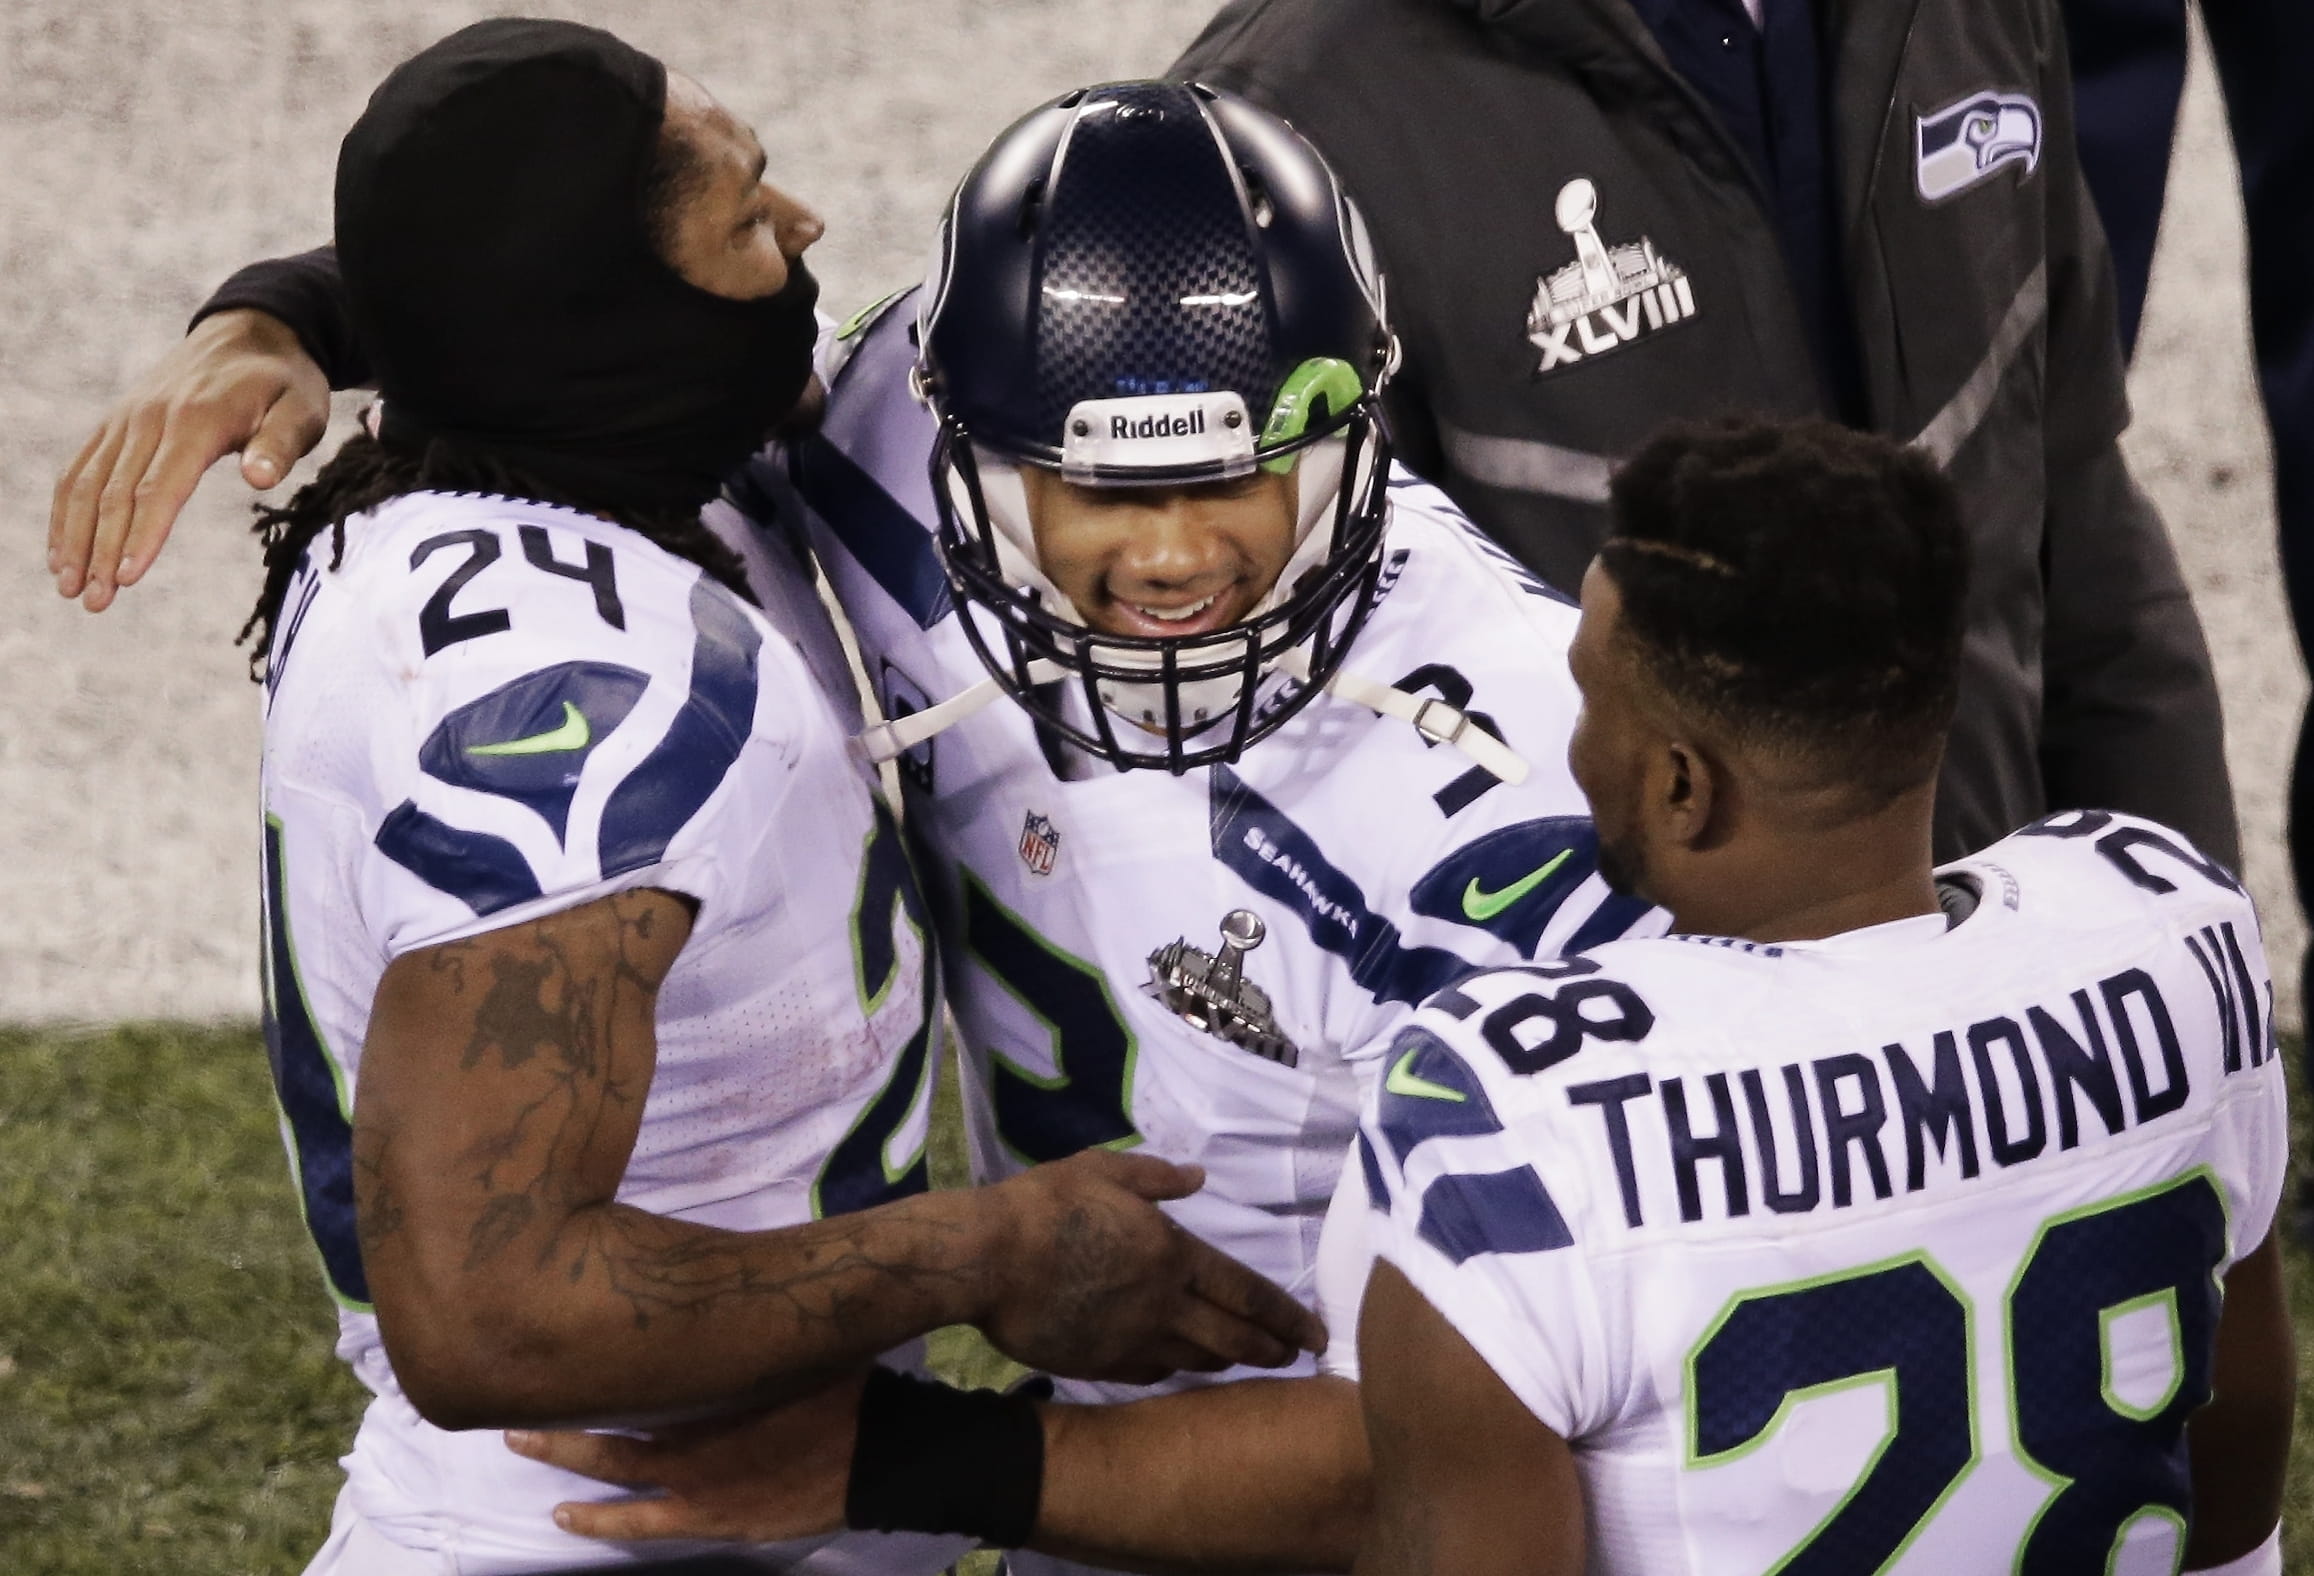 Seattle Seahawks teammates Russell Wilson, center, Marshawn Lynch, left, and Walter Thurmond celebrate their Super Bowl XLVIII victory over the Denver Broncos.